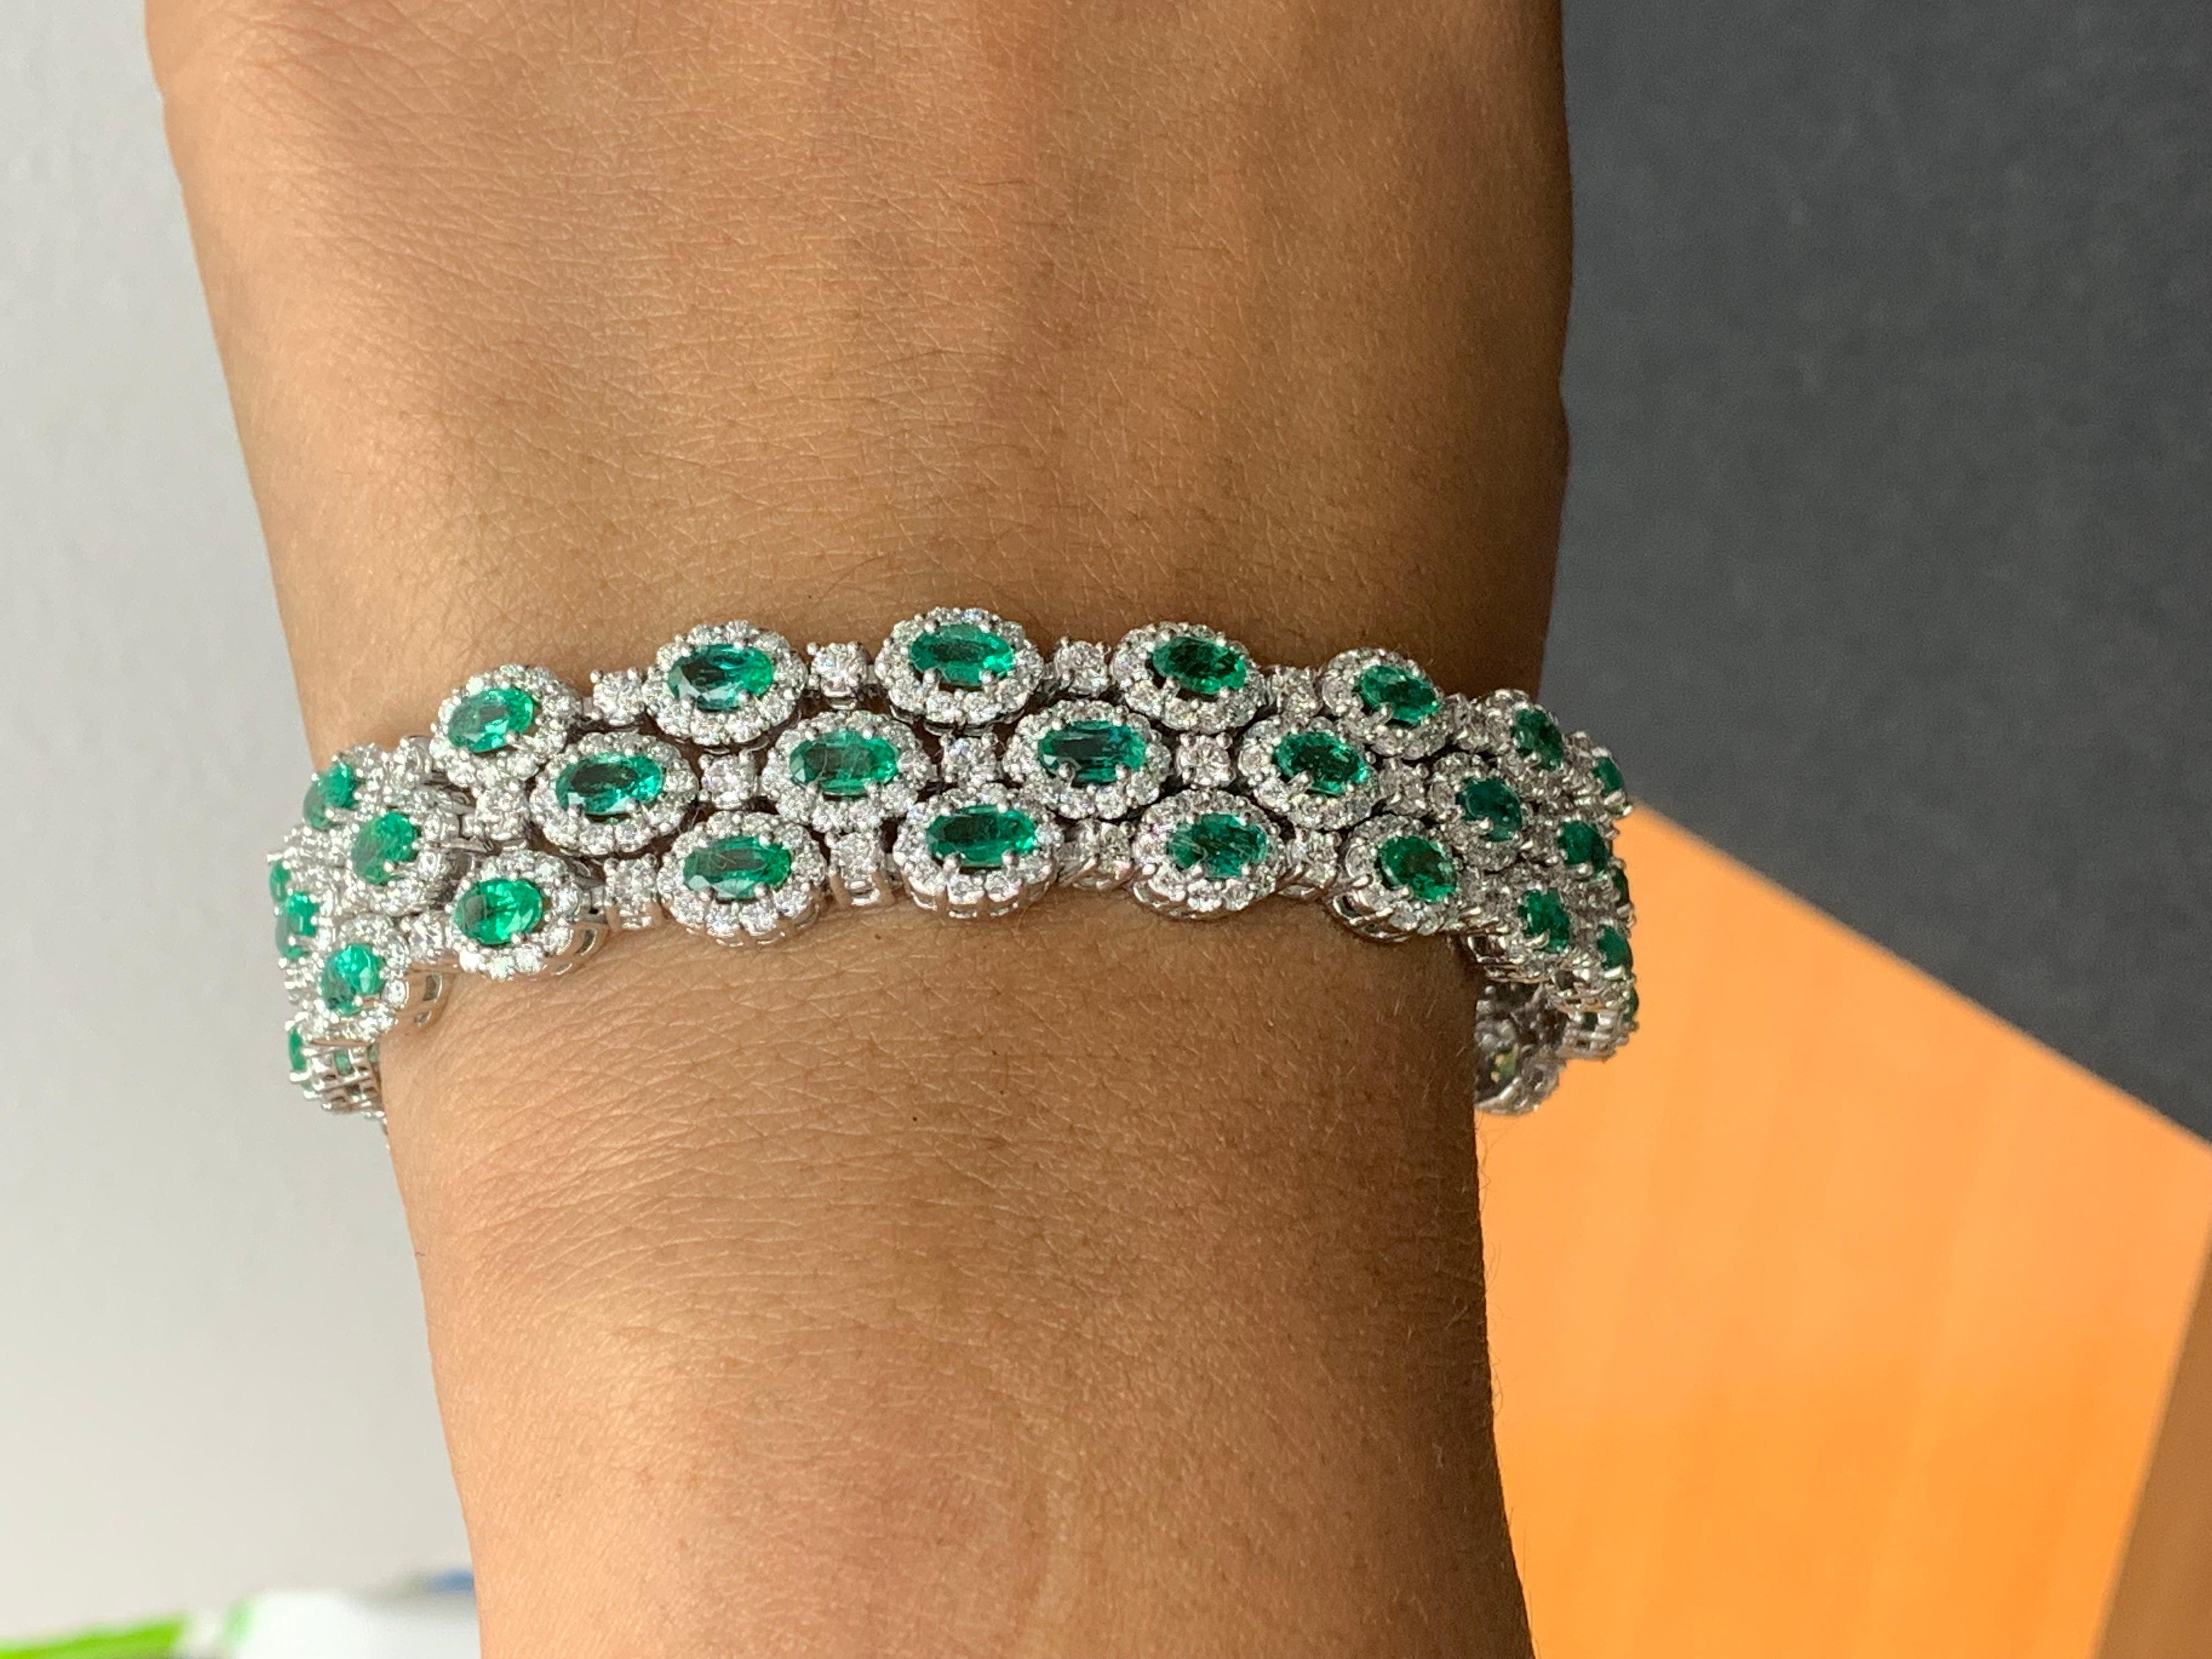 10.95 Carat Oval Cut Emerald and Diamond 3 Row Bracelet in 14K White Gold For Sale 3